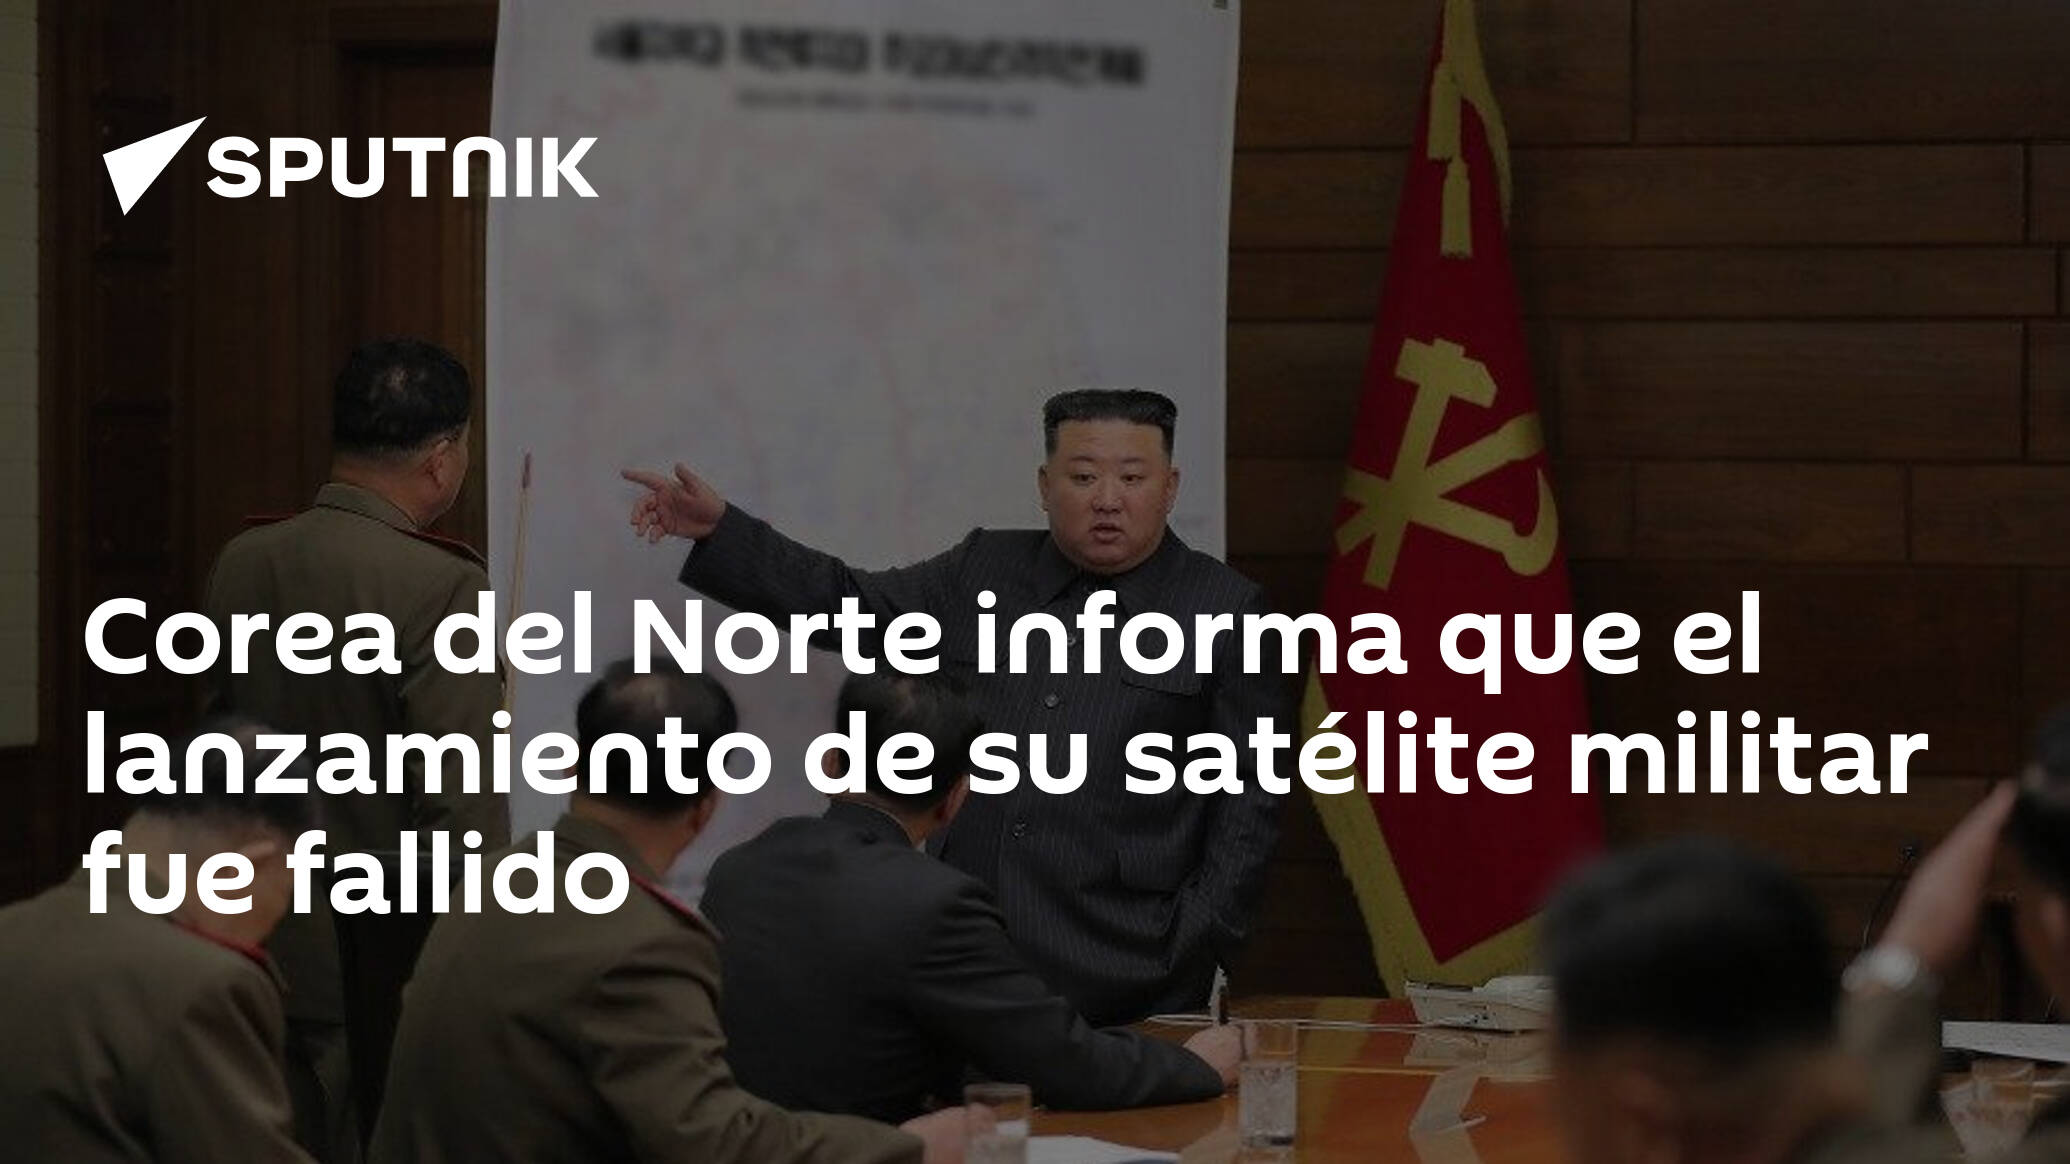 North Korea stated that the launch of its military satellite failed